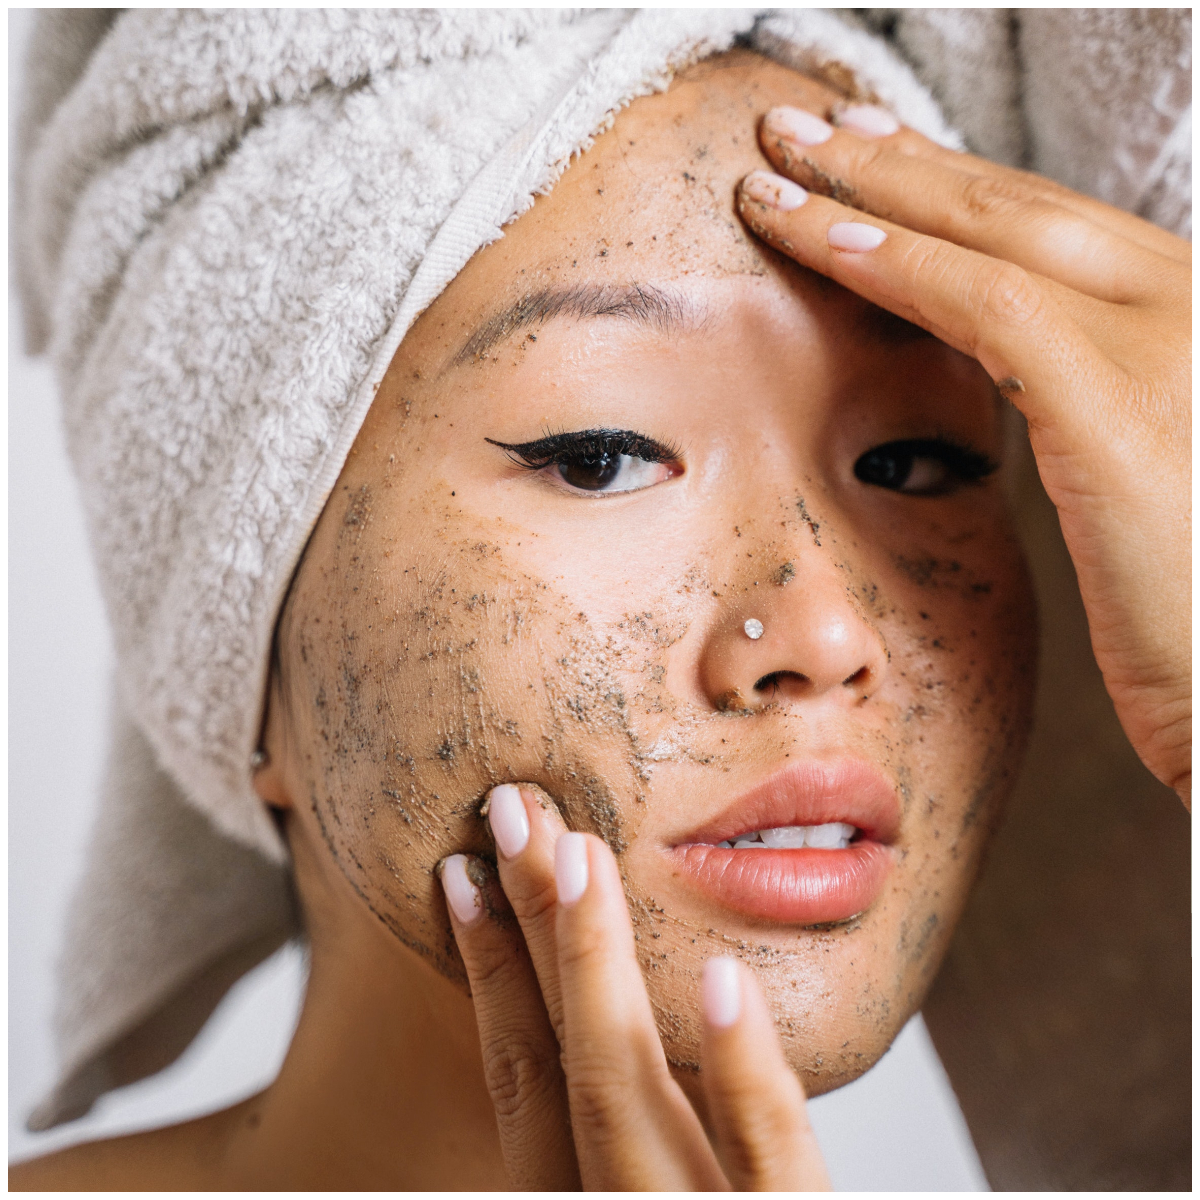 7 Best exfoliating scrubs to shed off dead skin and attain healthy, glowing skin